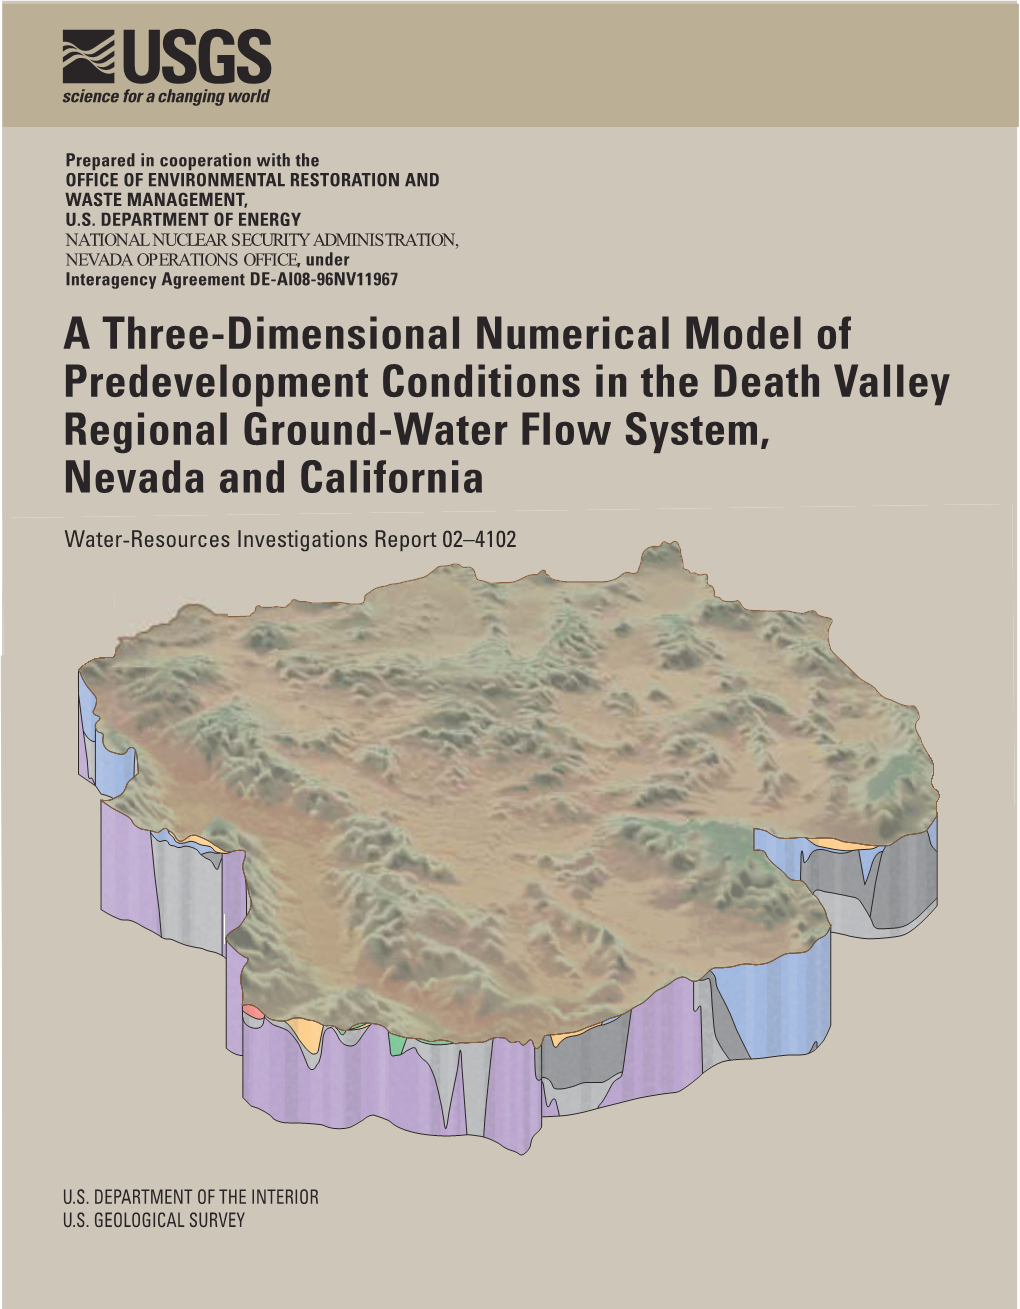 A Three-Dimensional Numerical Model of Predevelopment Conditions in the Death Valley Regional Ground-Water Flow System, Nevada and California